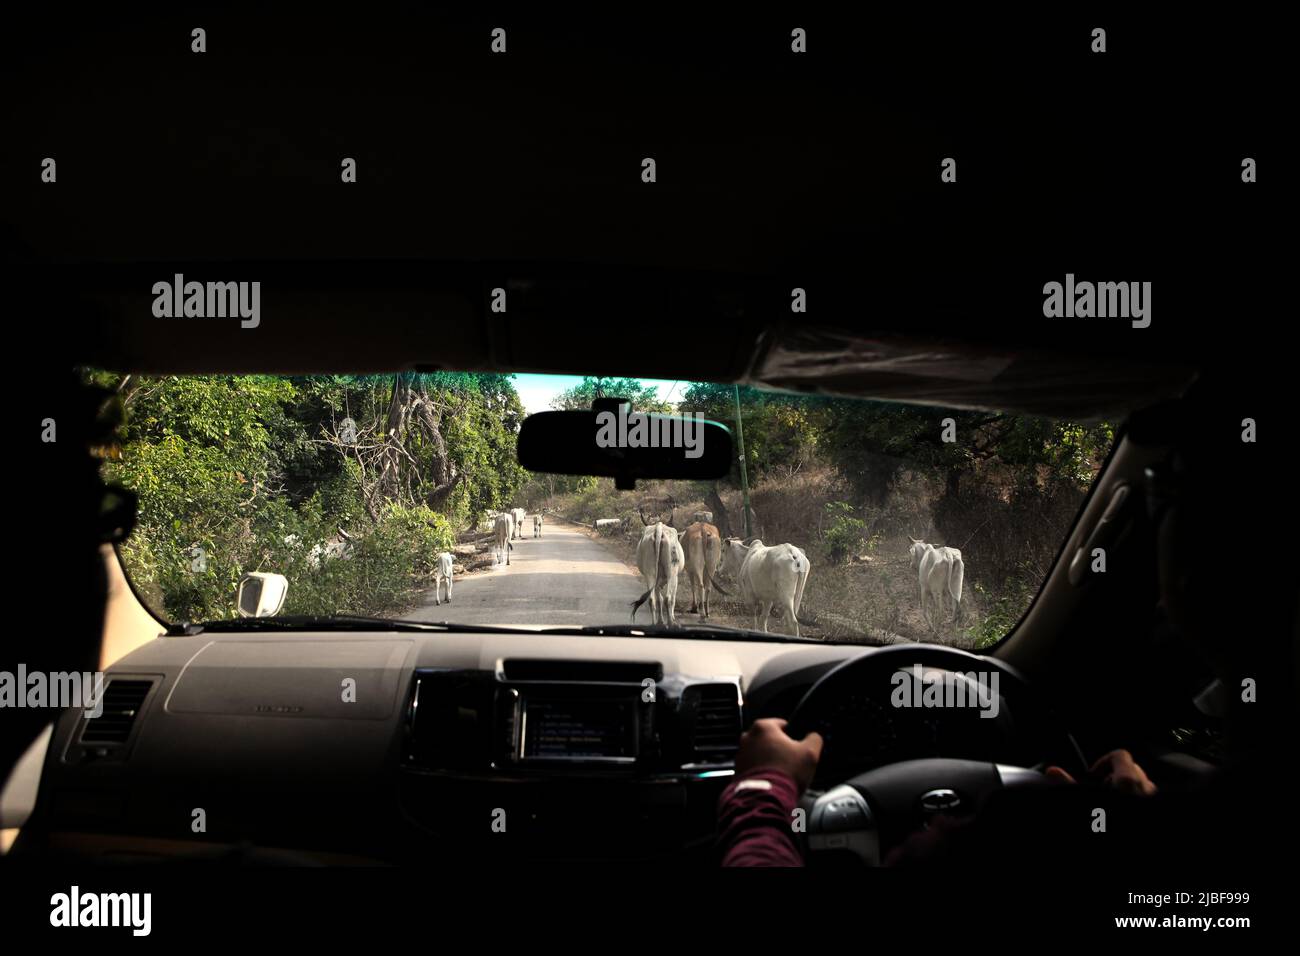 A herd of cattles walking on a rural road in front of a moving car in East Sumba, East Nusa Tenggara, Indonesia. Stock Photo